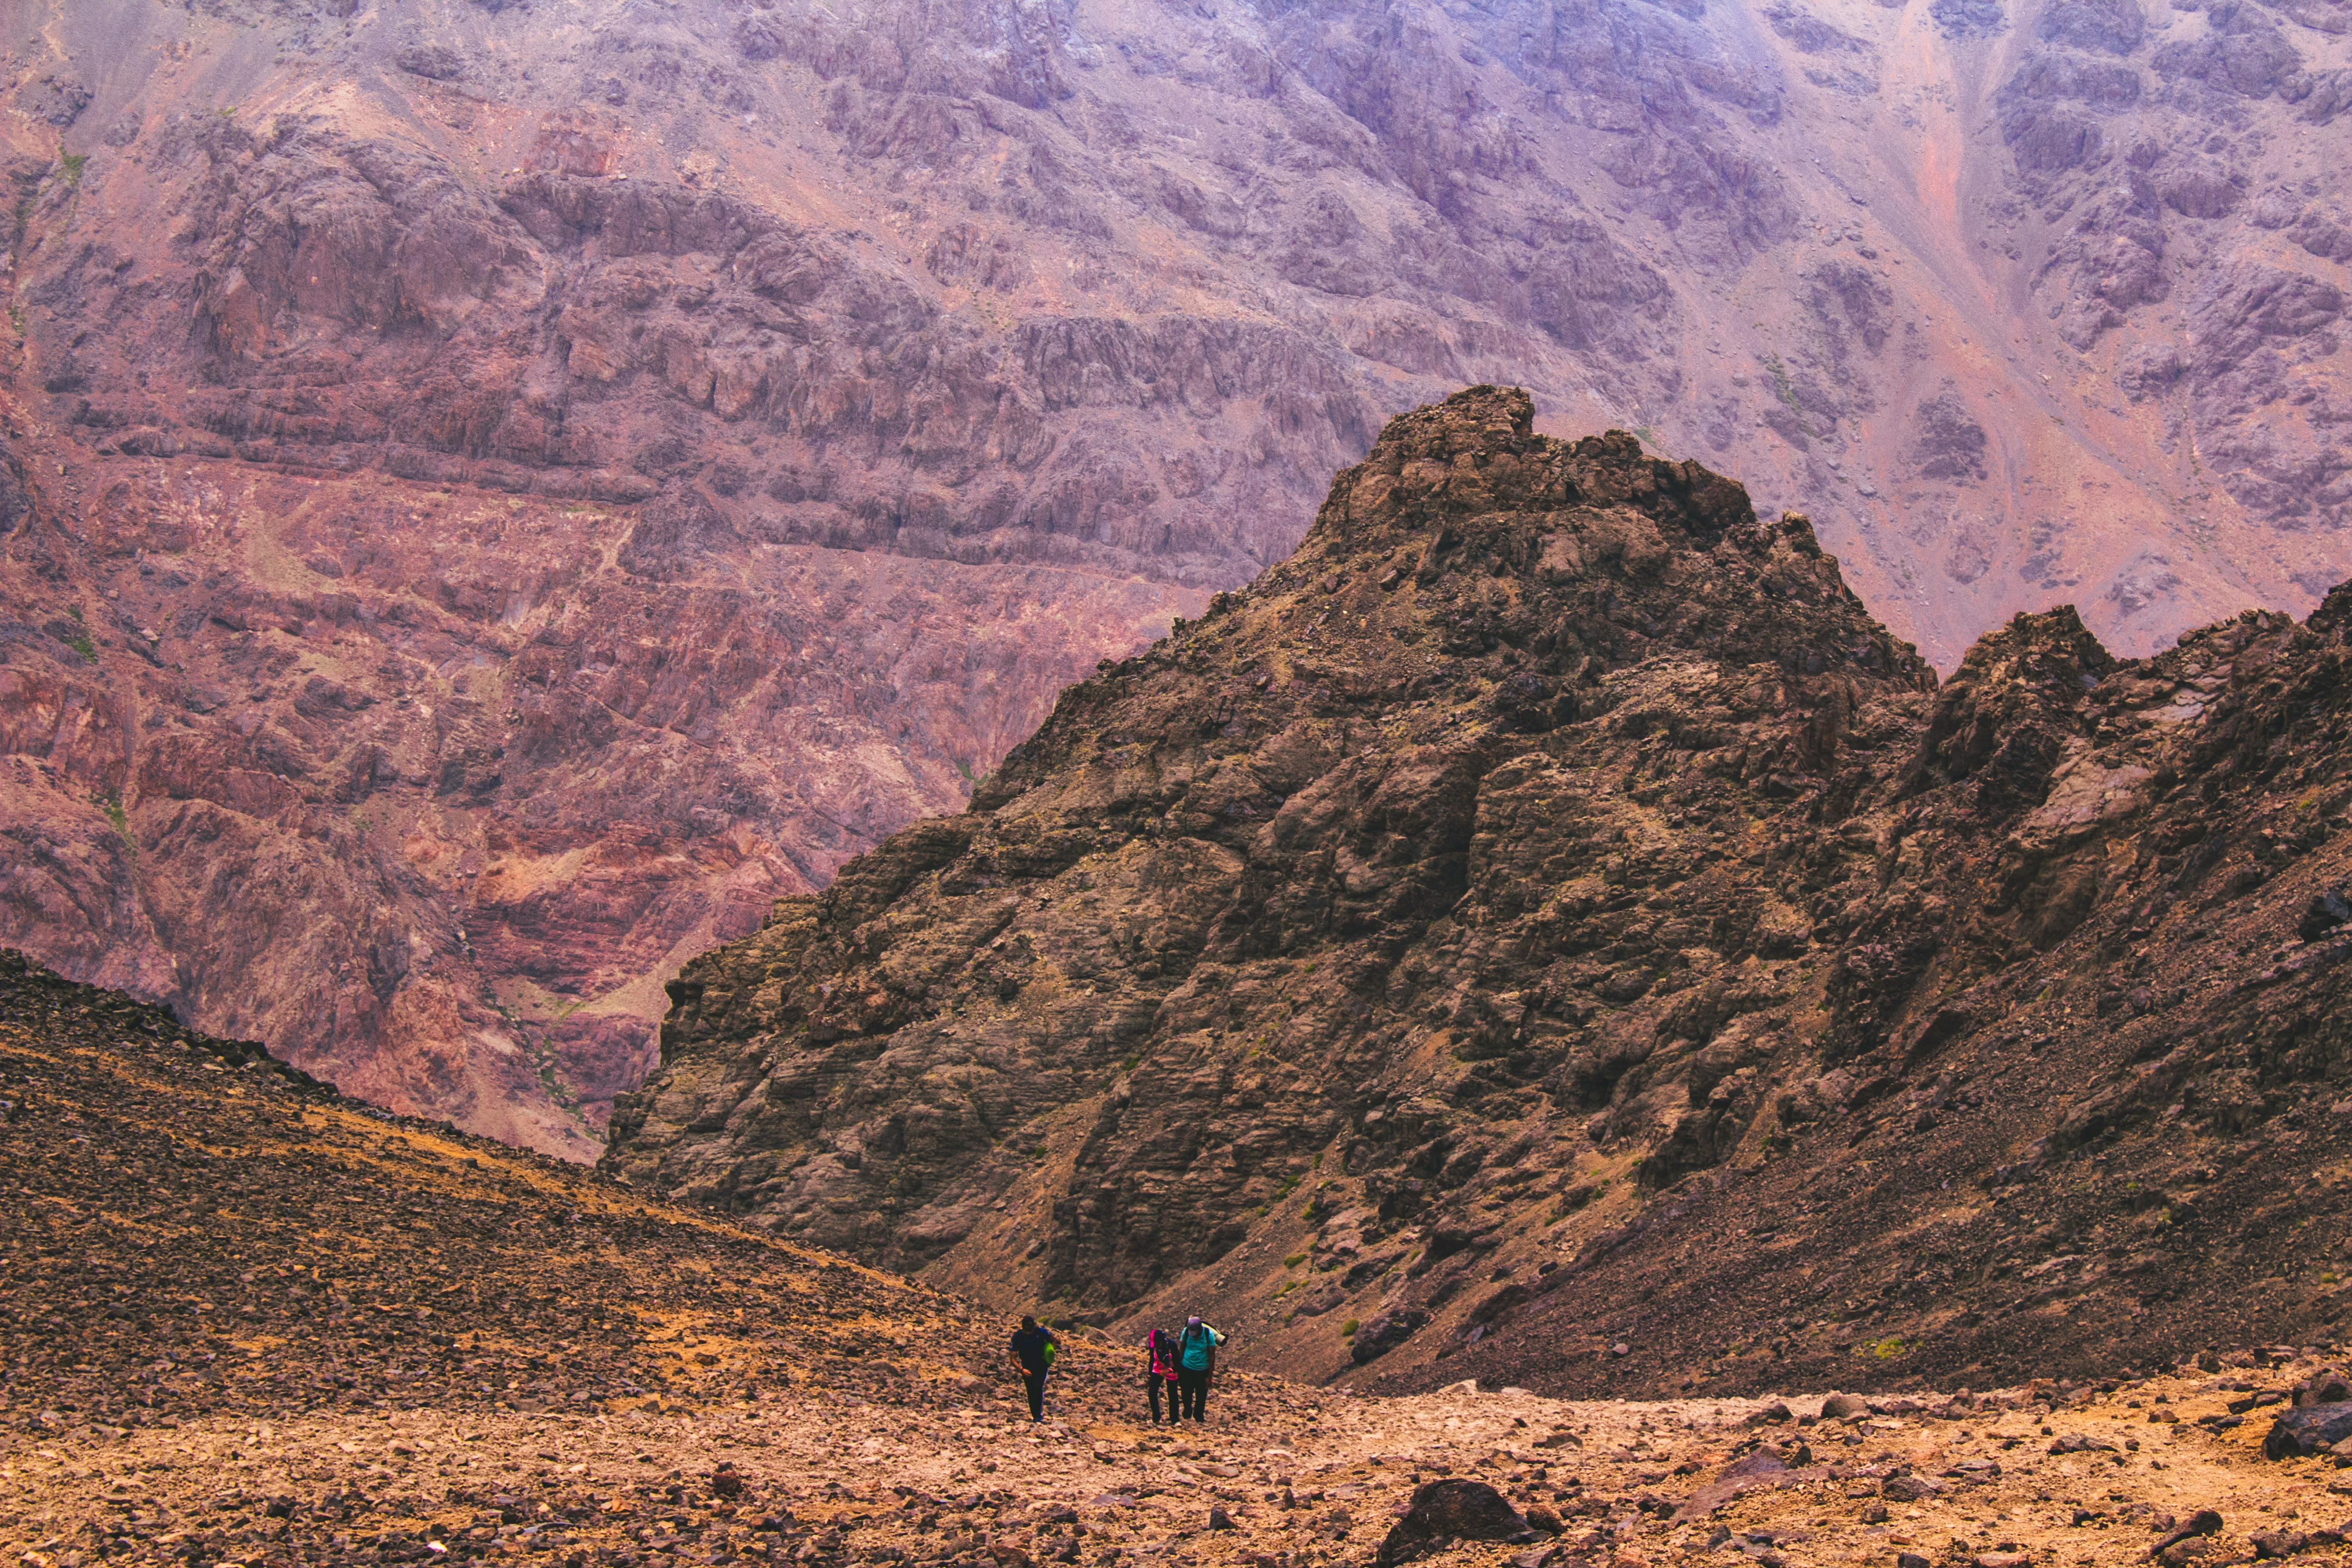 Hiking towards Refuge de Toubkal, on the day before summit day